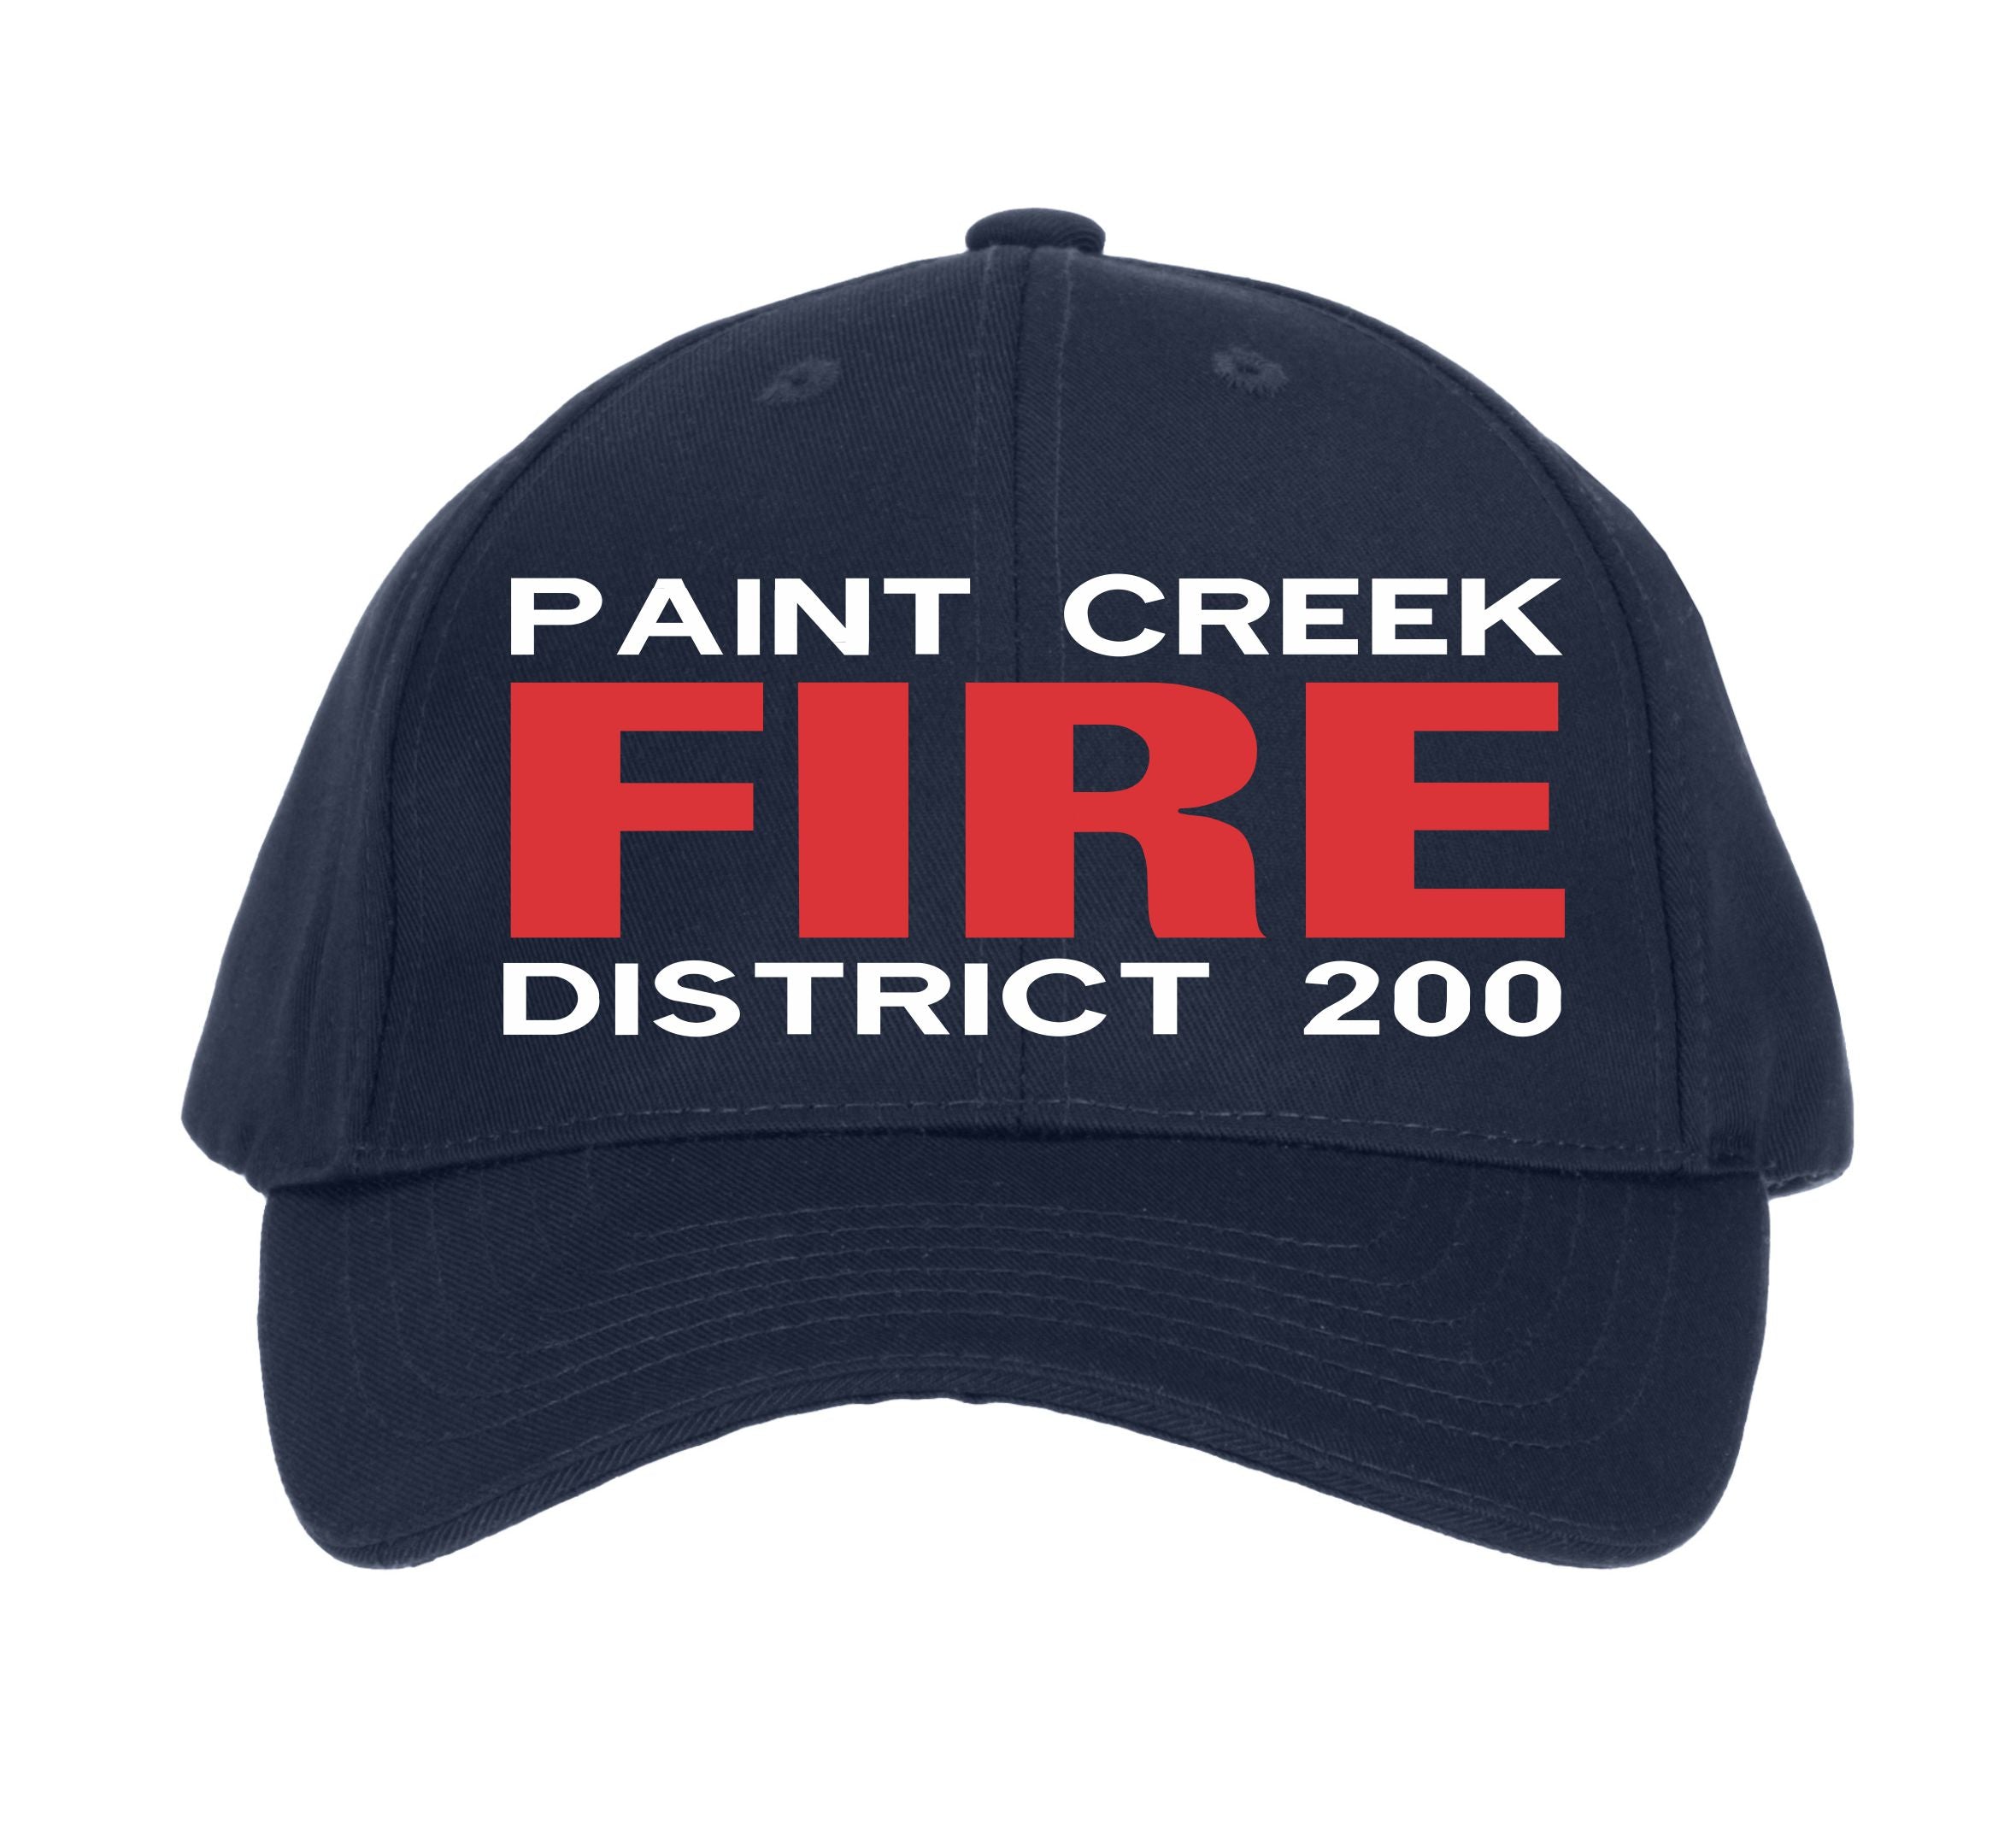 Paint Creek Fire District 200 Custom Embroidered Hat